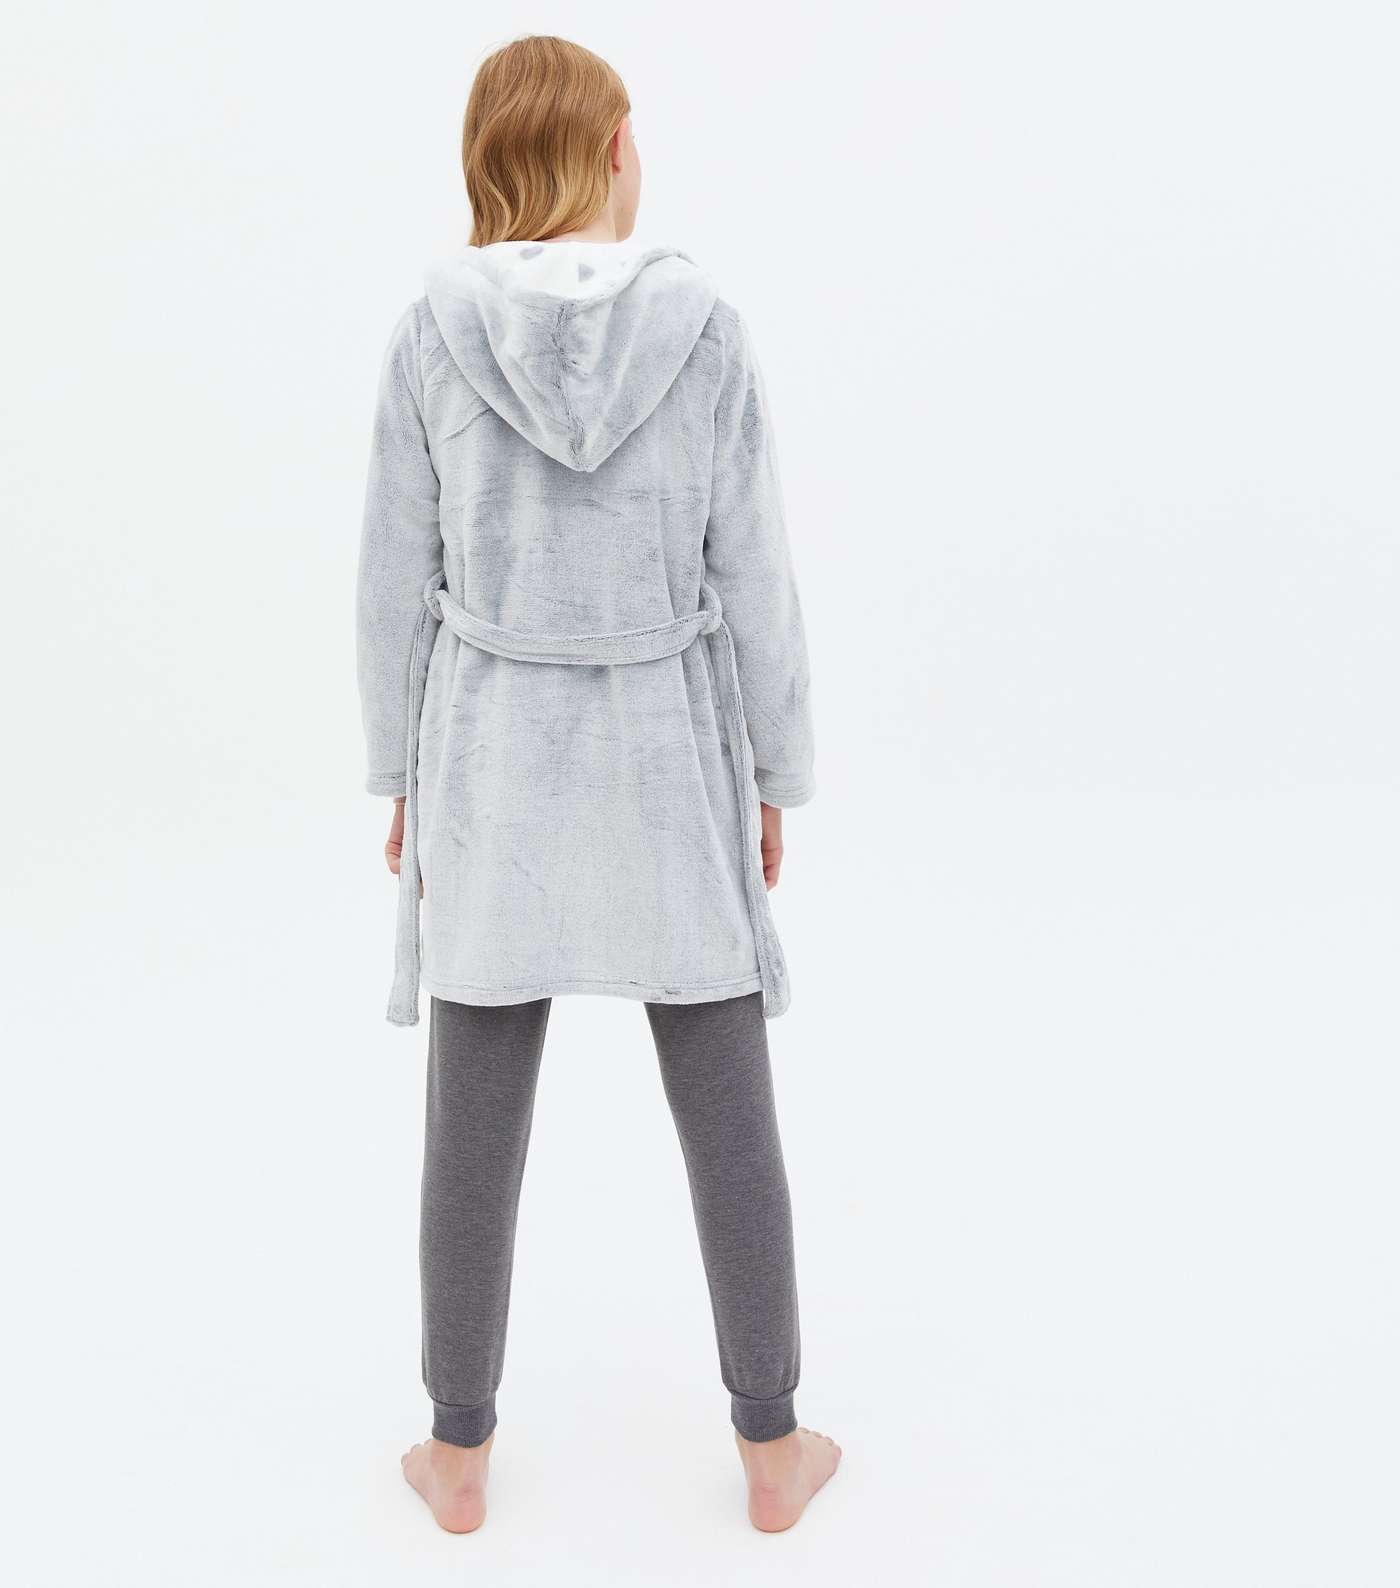 Girls Pale Grey Heart Hooded Dressing Gown Image 4